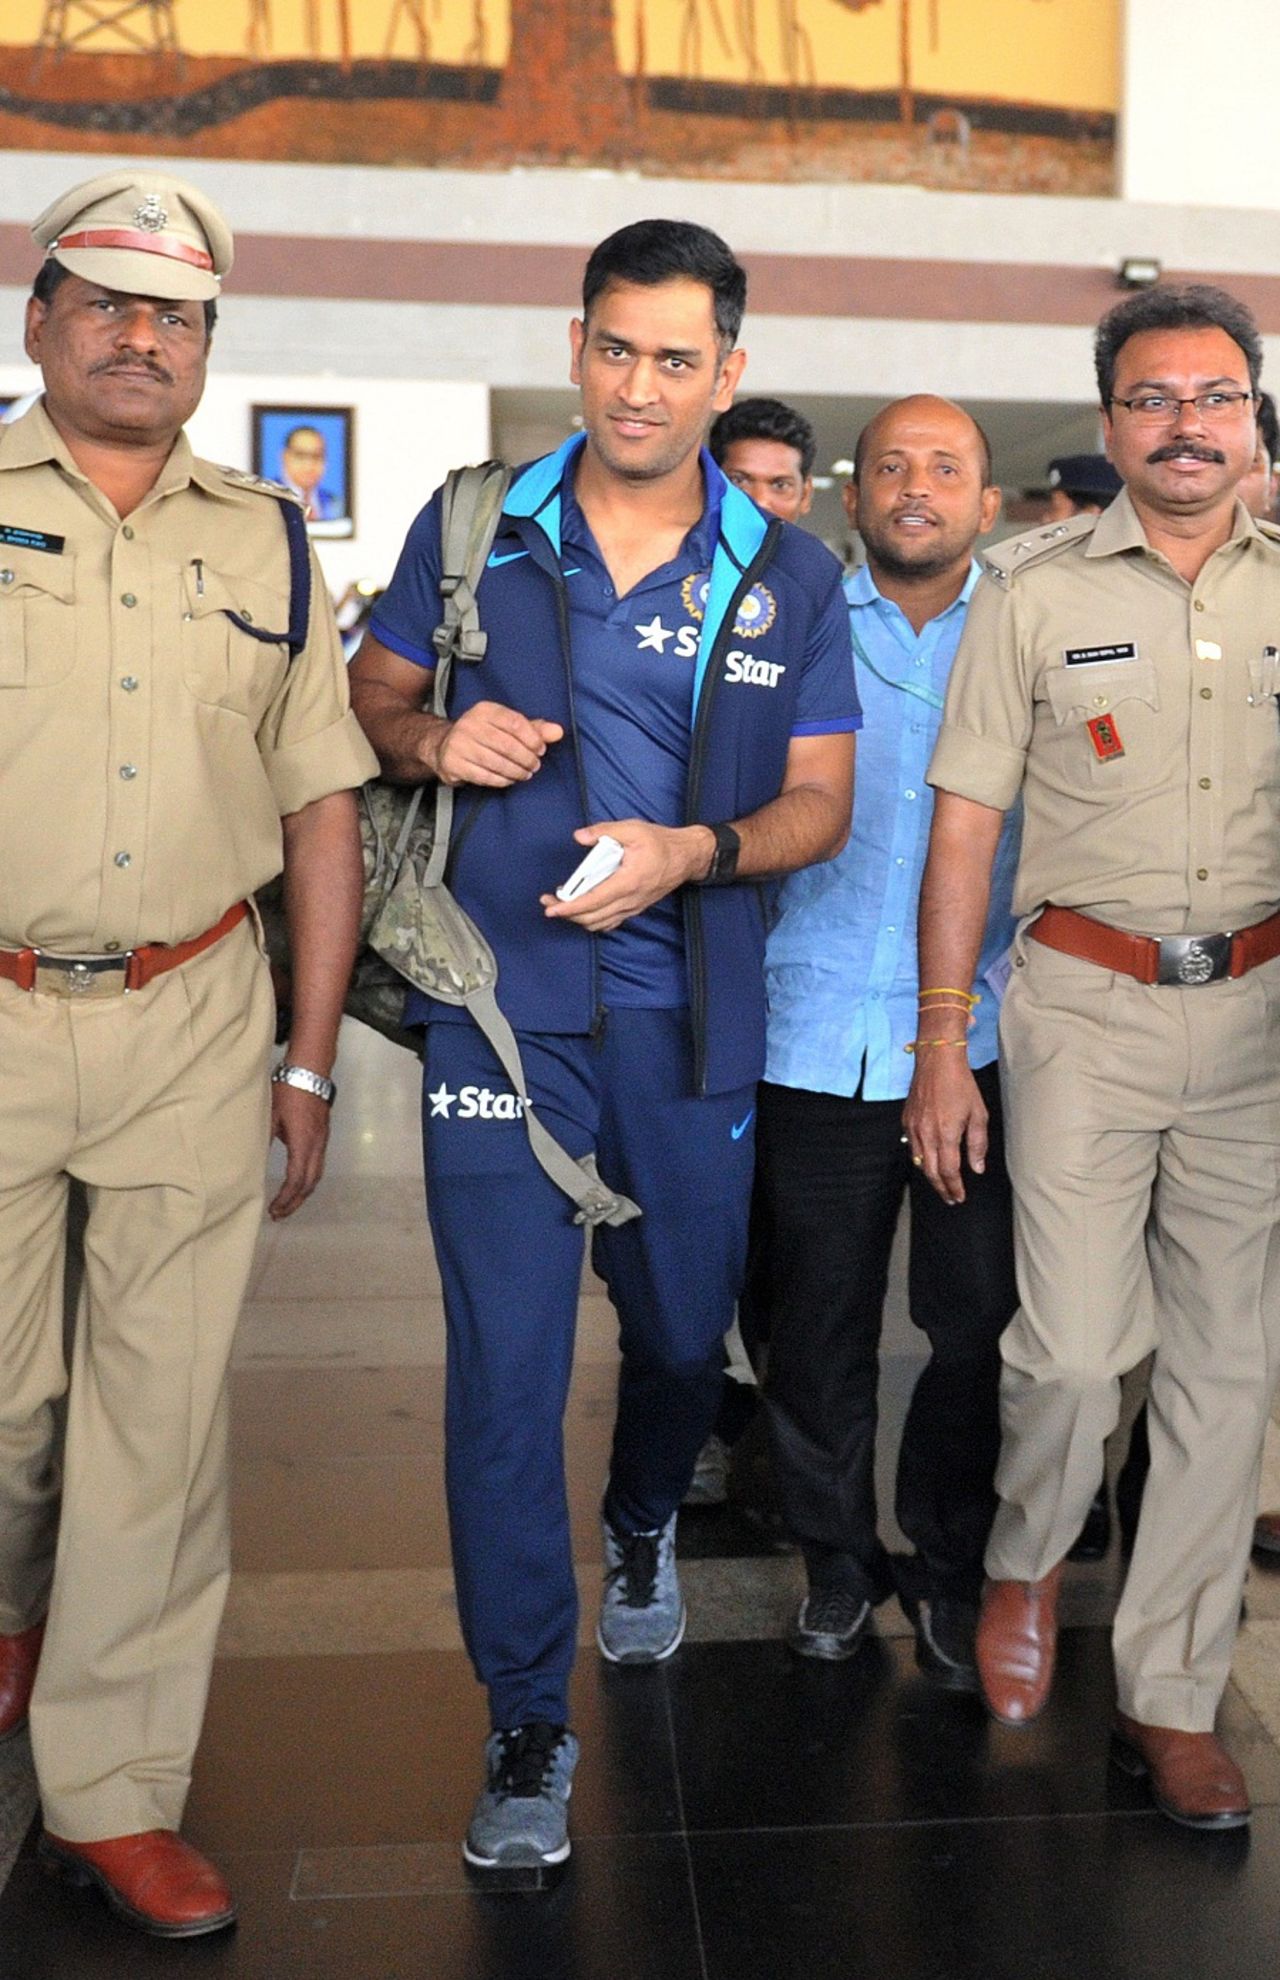 Amid heavy security, MS Dhoni makes his way out of Visakhapatnam airport, Visakhapatnam, February 13, 2016